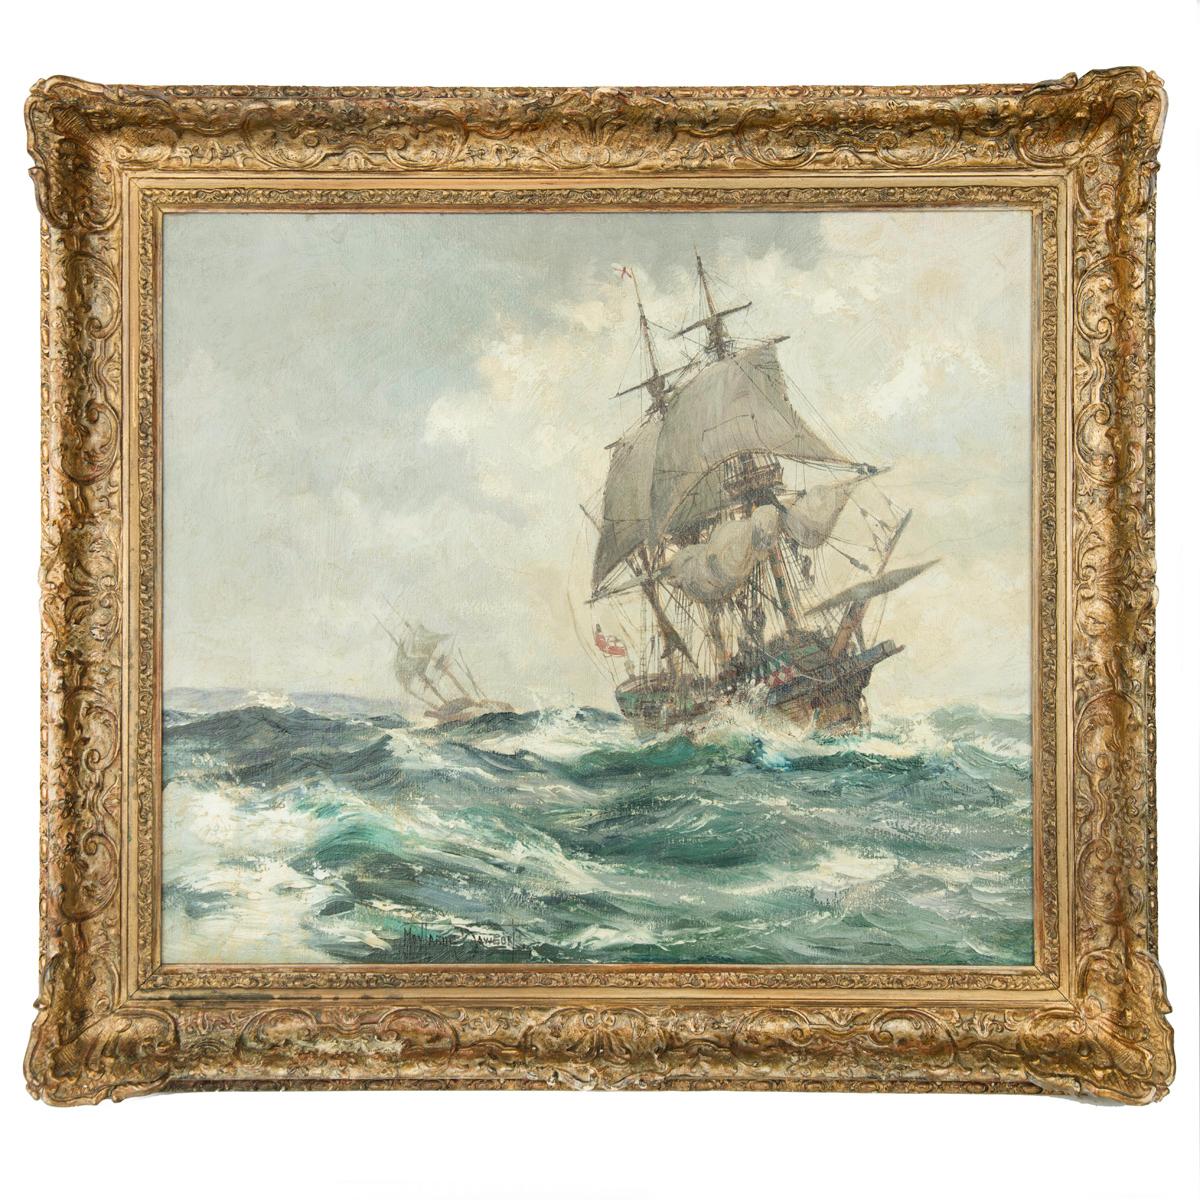 ‘The Ark and the Dove off the Scillies with Lord Baltimore aboard’ by Montague Dawson, reputedly a commission for the White House,  oil on board, showing the two ships of Cecilius Calvert, Lord Baltimore, on their first expedition to Maryland in